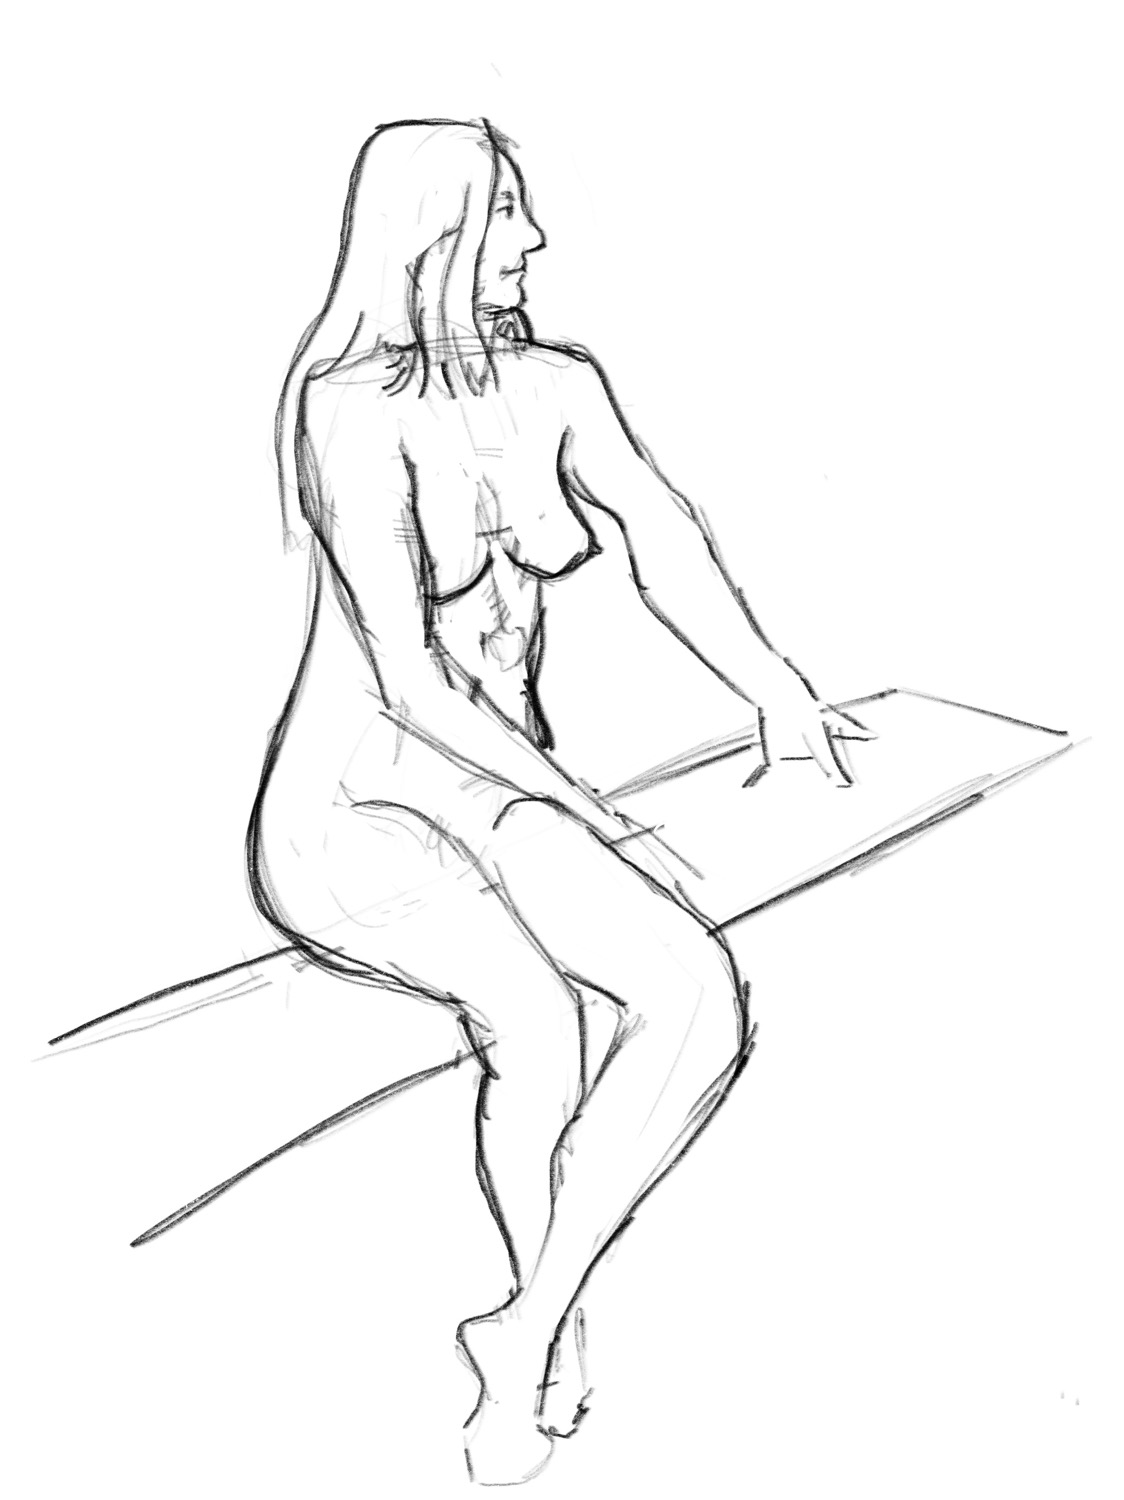 A sketch from a life drawing class of a woman sitting on a bench